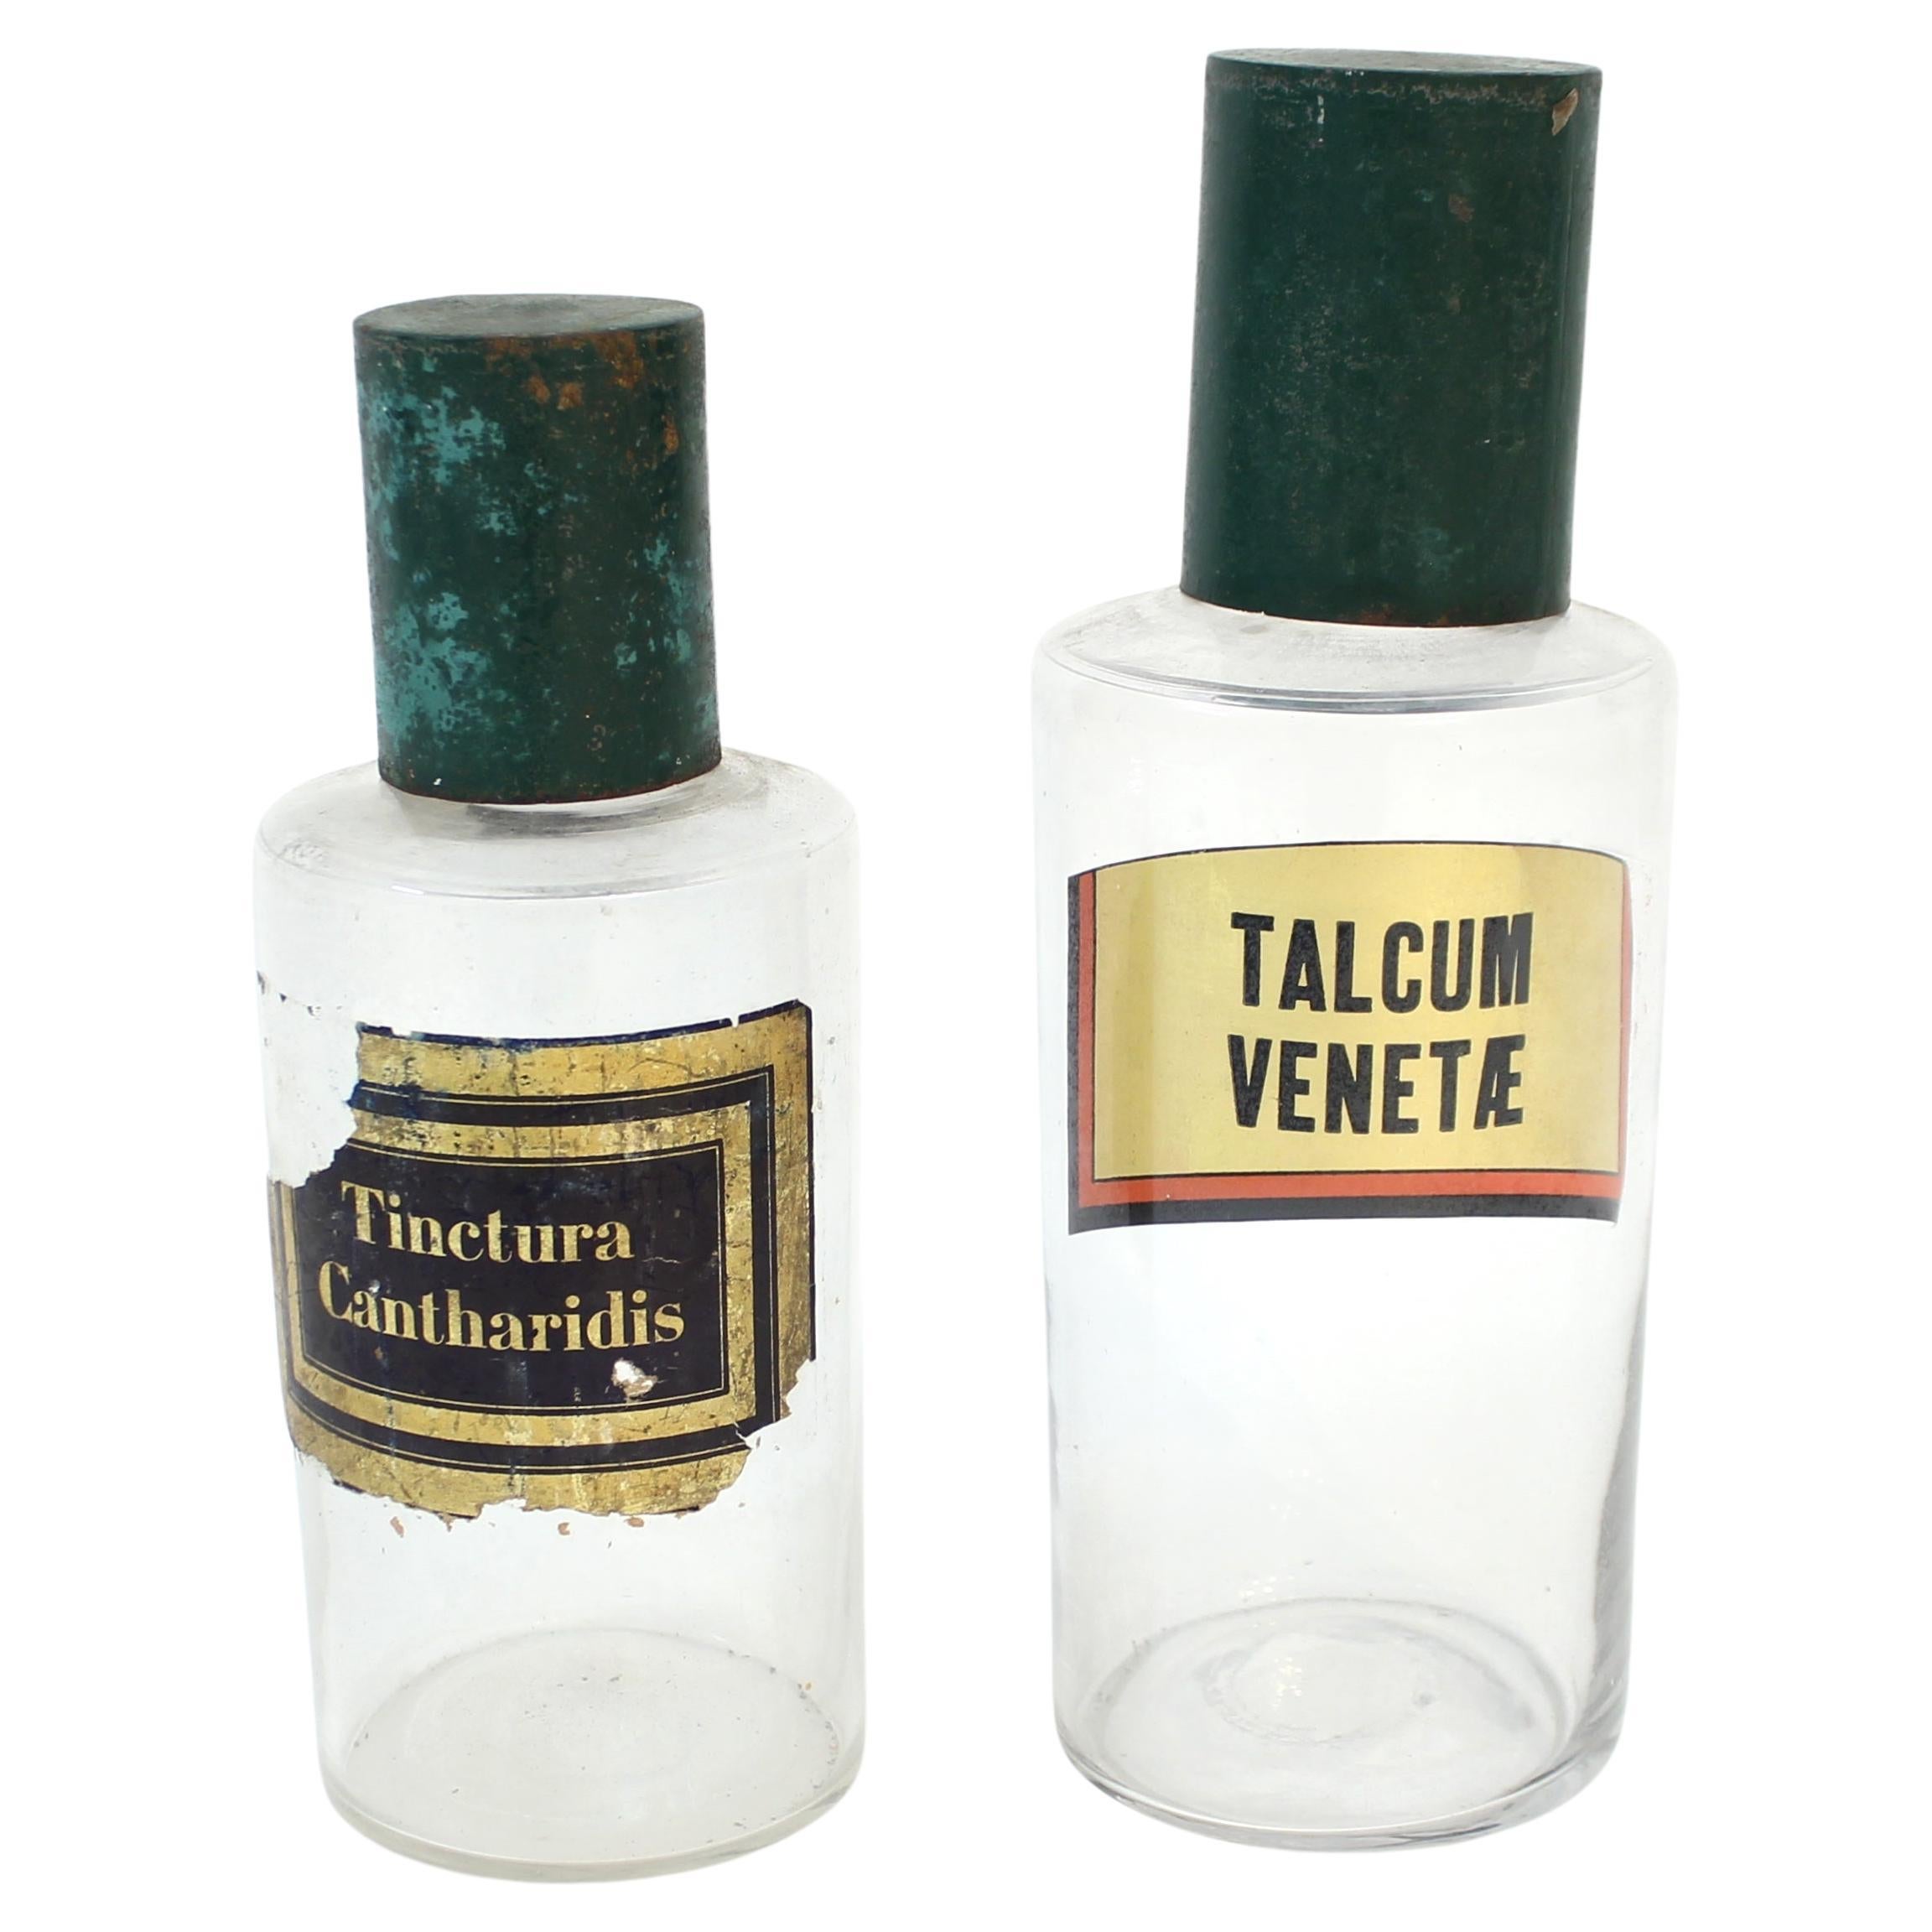 https://a.1stdibscdn.com/pair-of-early-20th-century-french-apothecary-bottles-ca-1930s-for-sale/f_34403/f_377013221703581864930/f_37701322_1703581865791_bg_processed.jpg